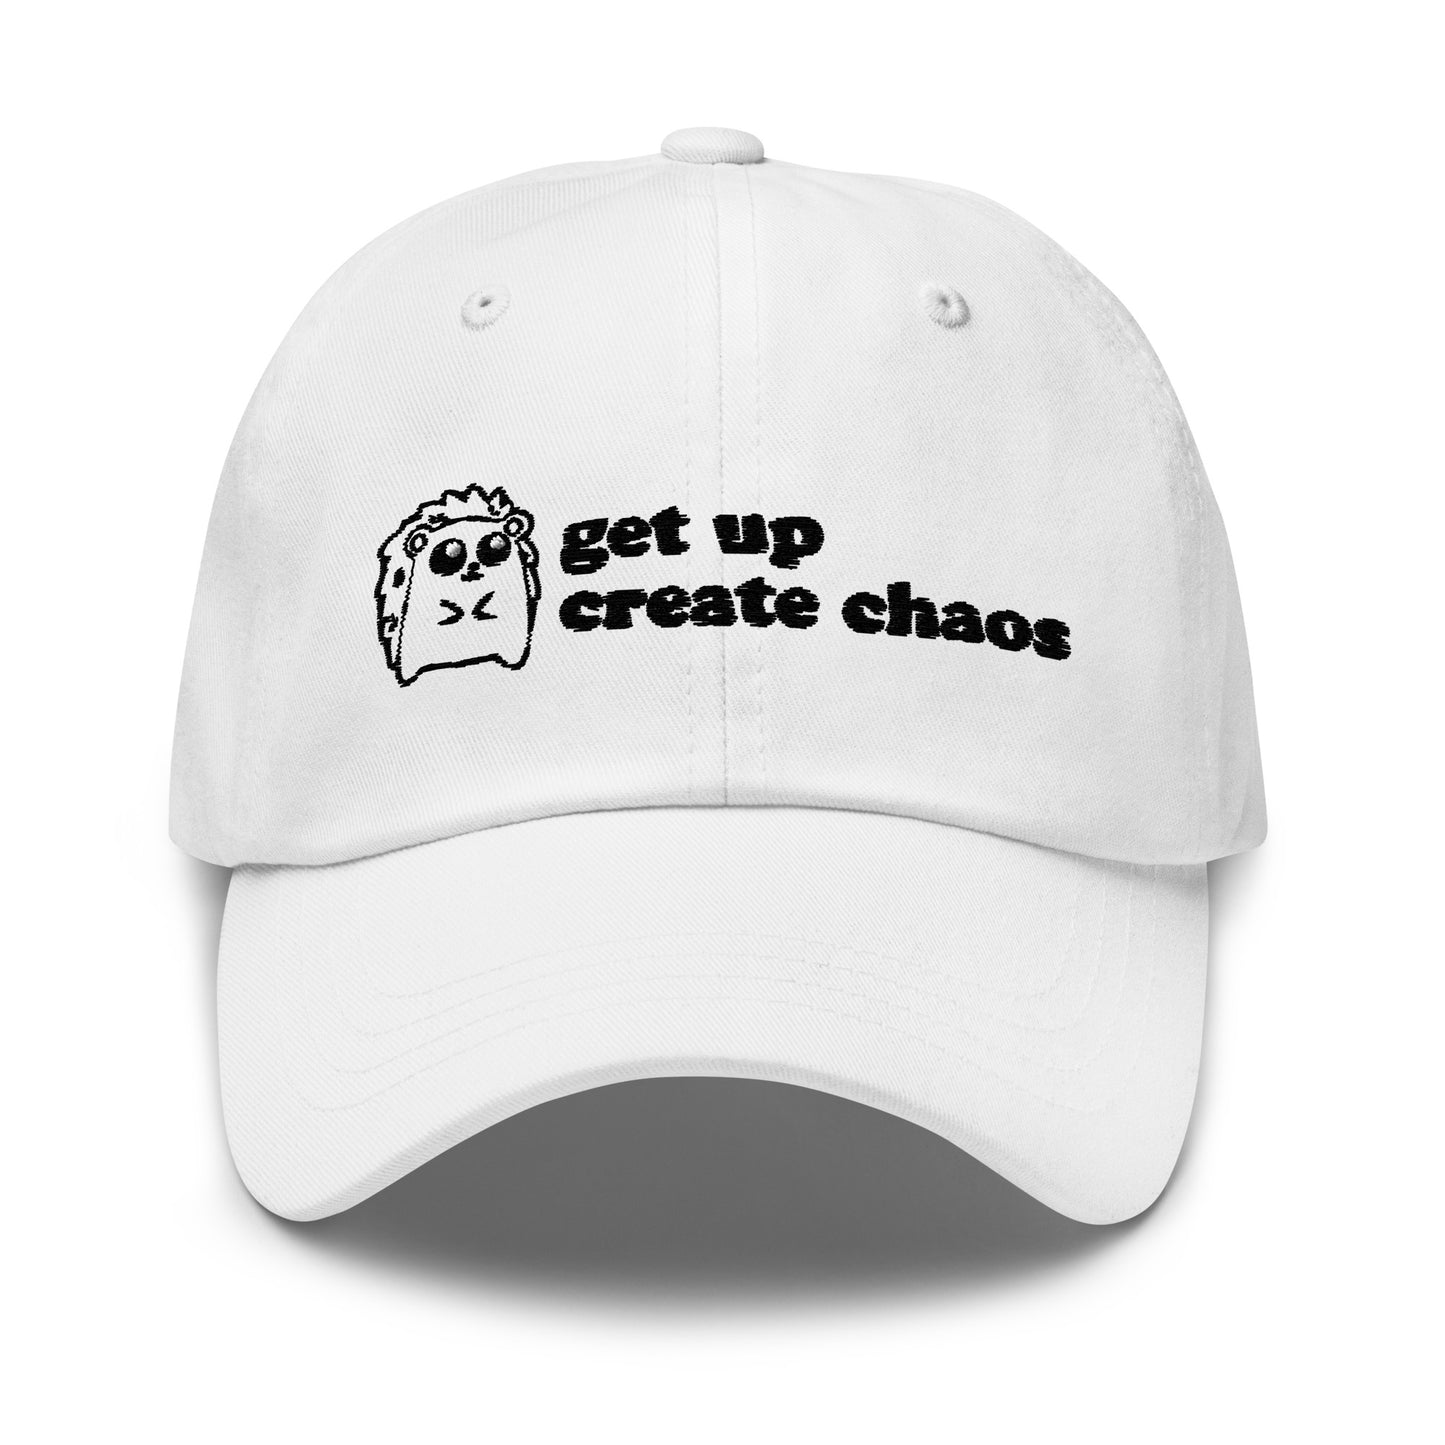 Get Up, Create Chaos hat